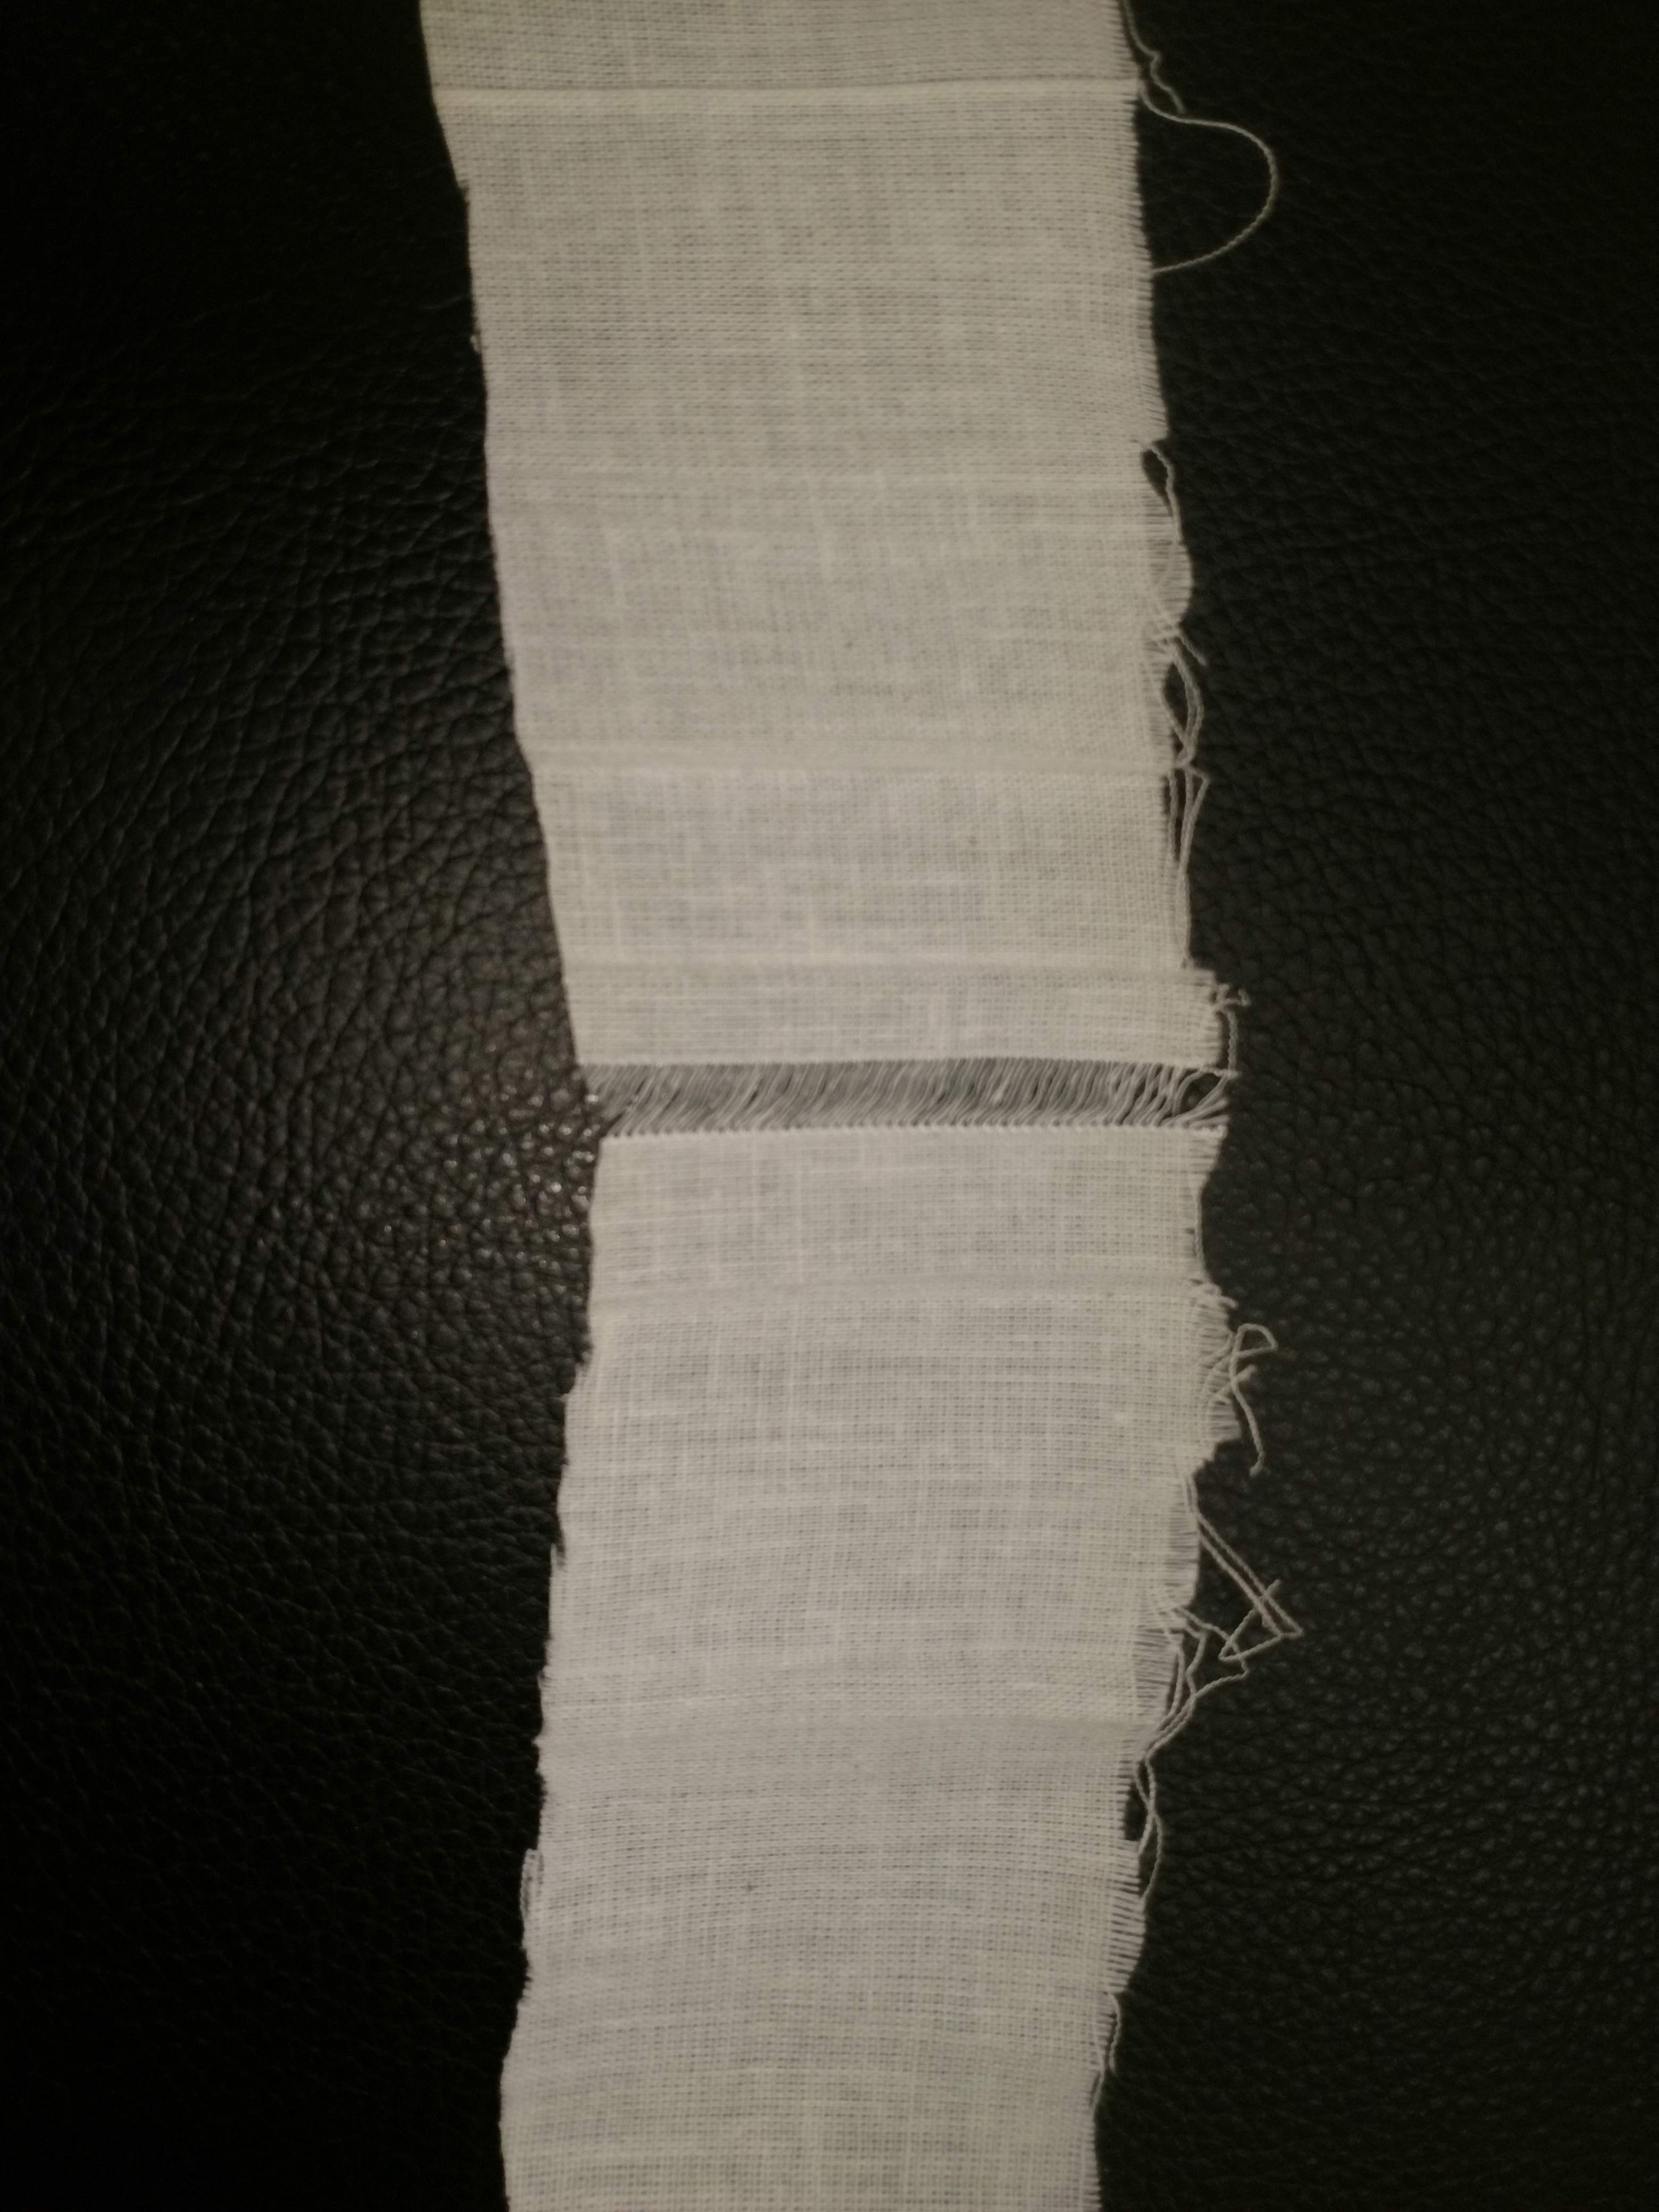 Center Selvage in a Textile Web - Selvage Guiding